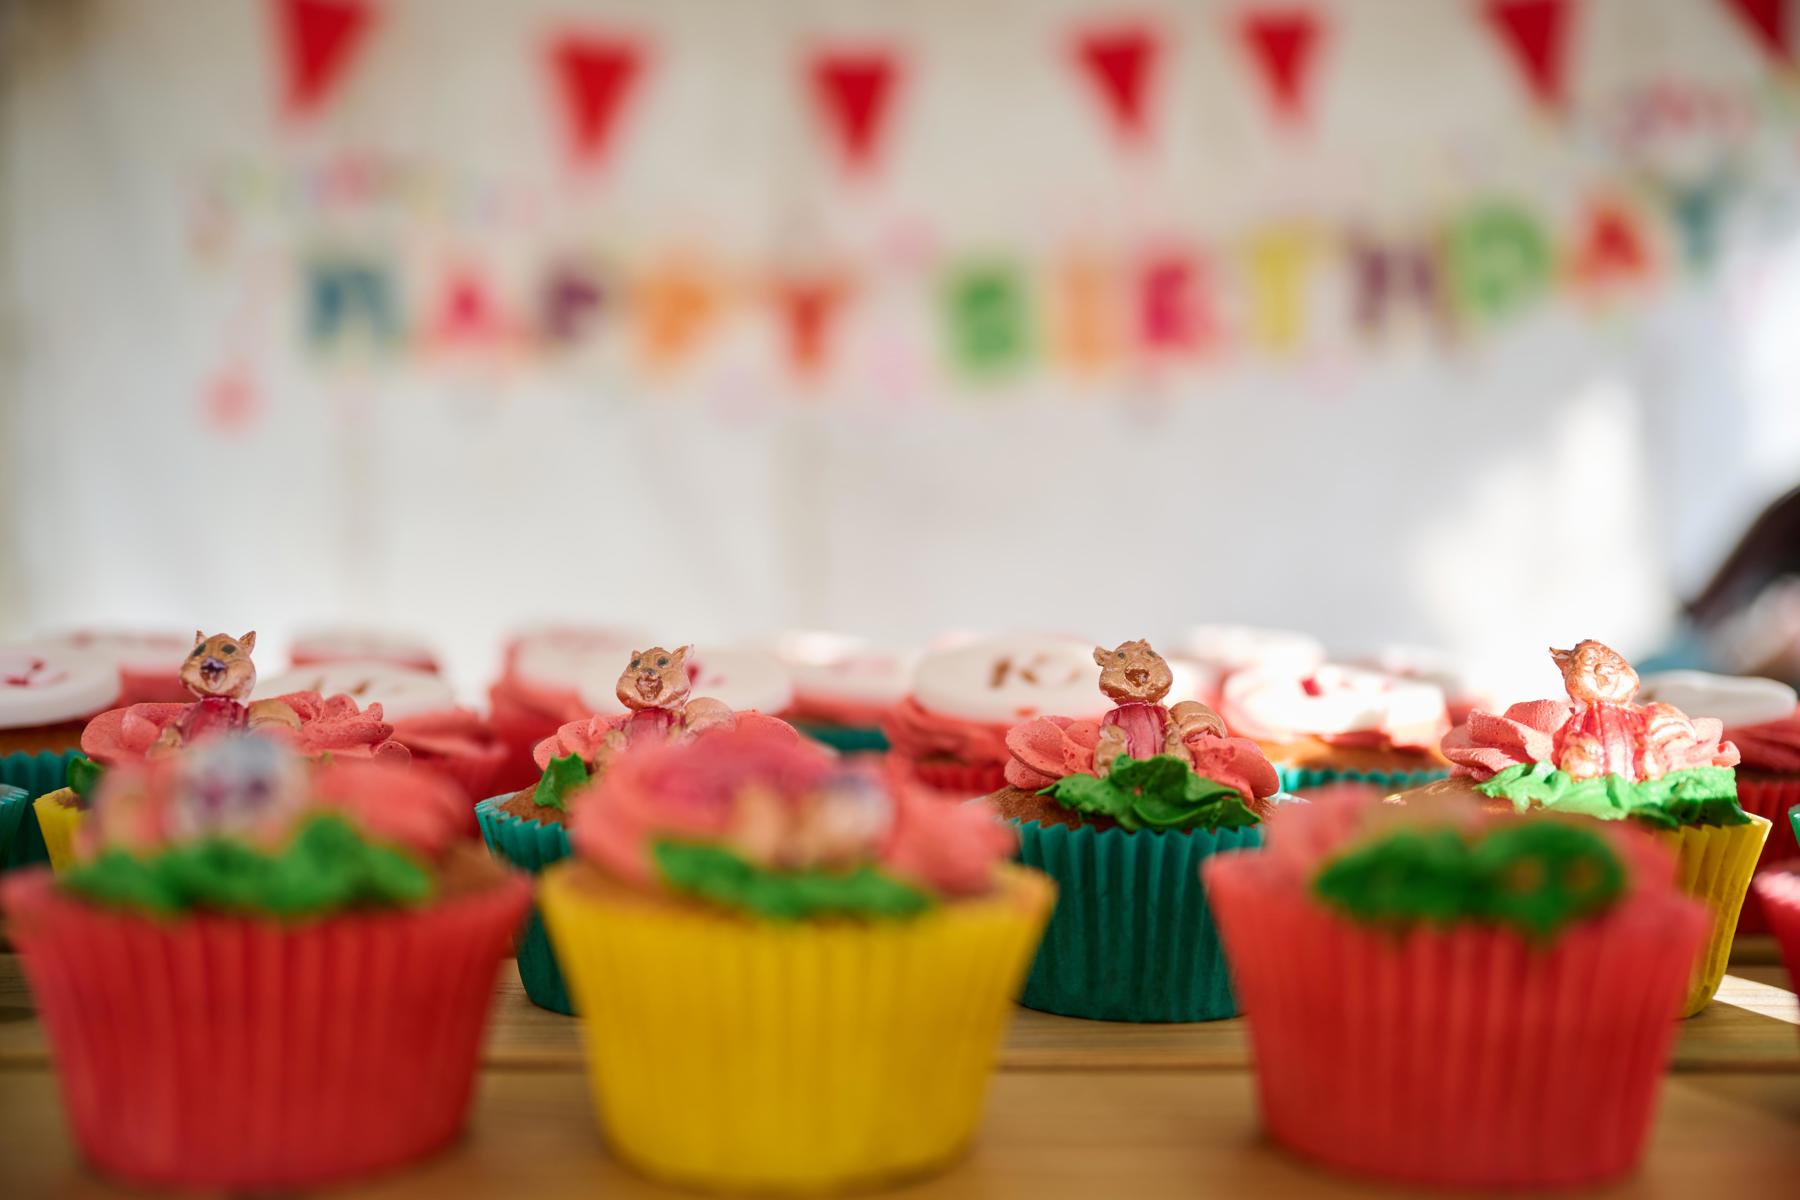 There are cupcakes are on a table, with a happy birthday banner in the background. The cakes have yellow, blue and red wrappers, with green icing and Squirrel decorations.